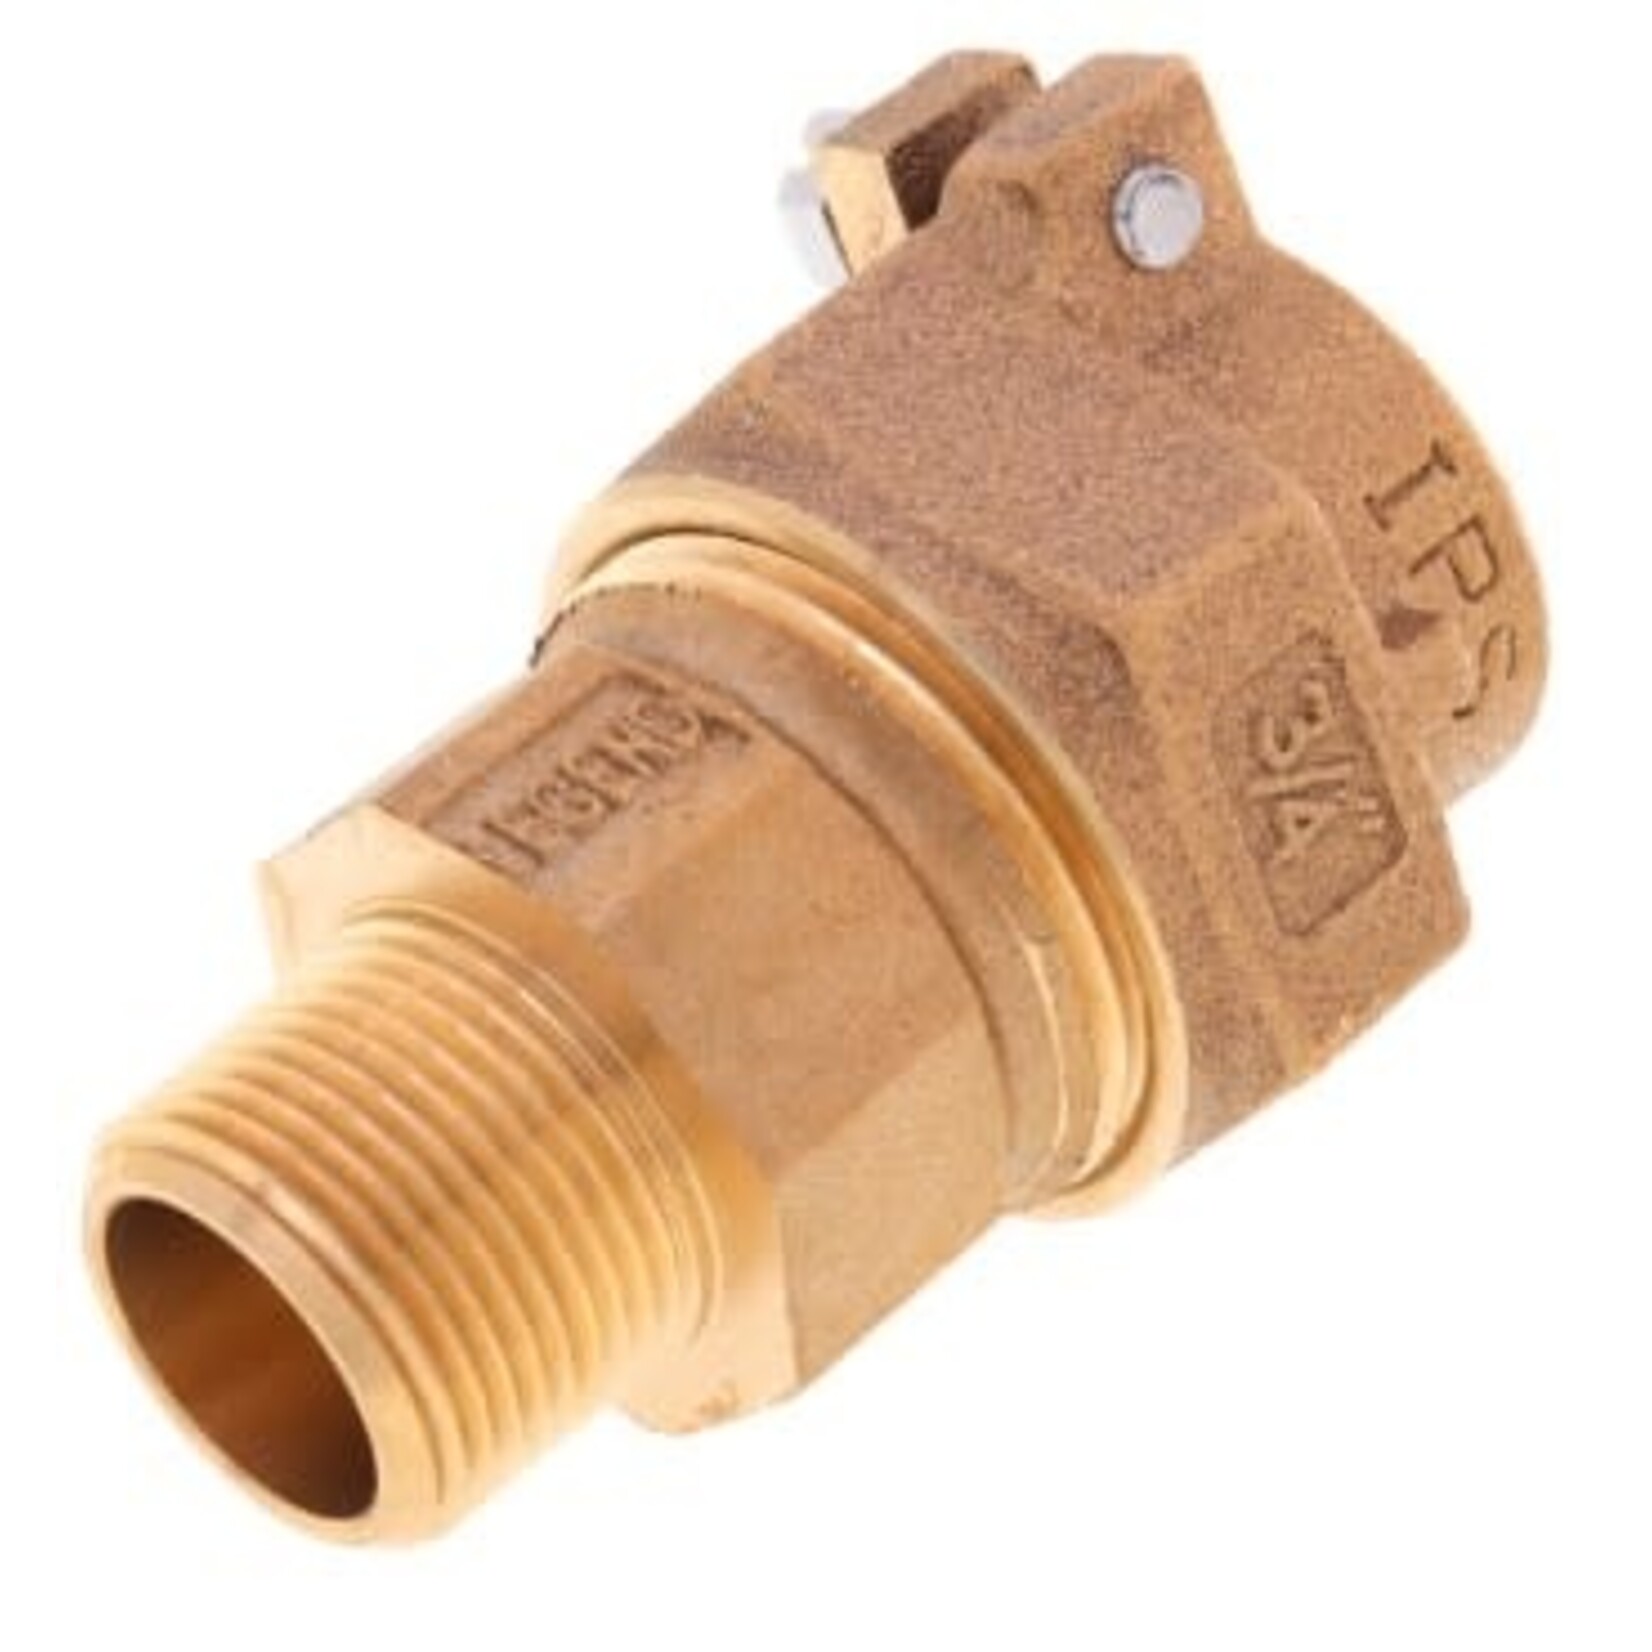 LEGEND VALVE 3/4 IN T-4320 BRASS PACK JOINT MALE COUPLING (MALE X IPS)